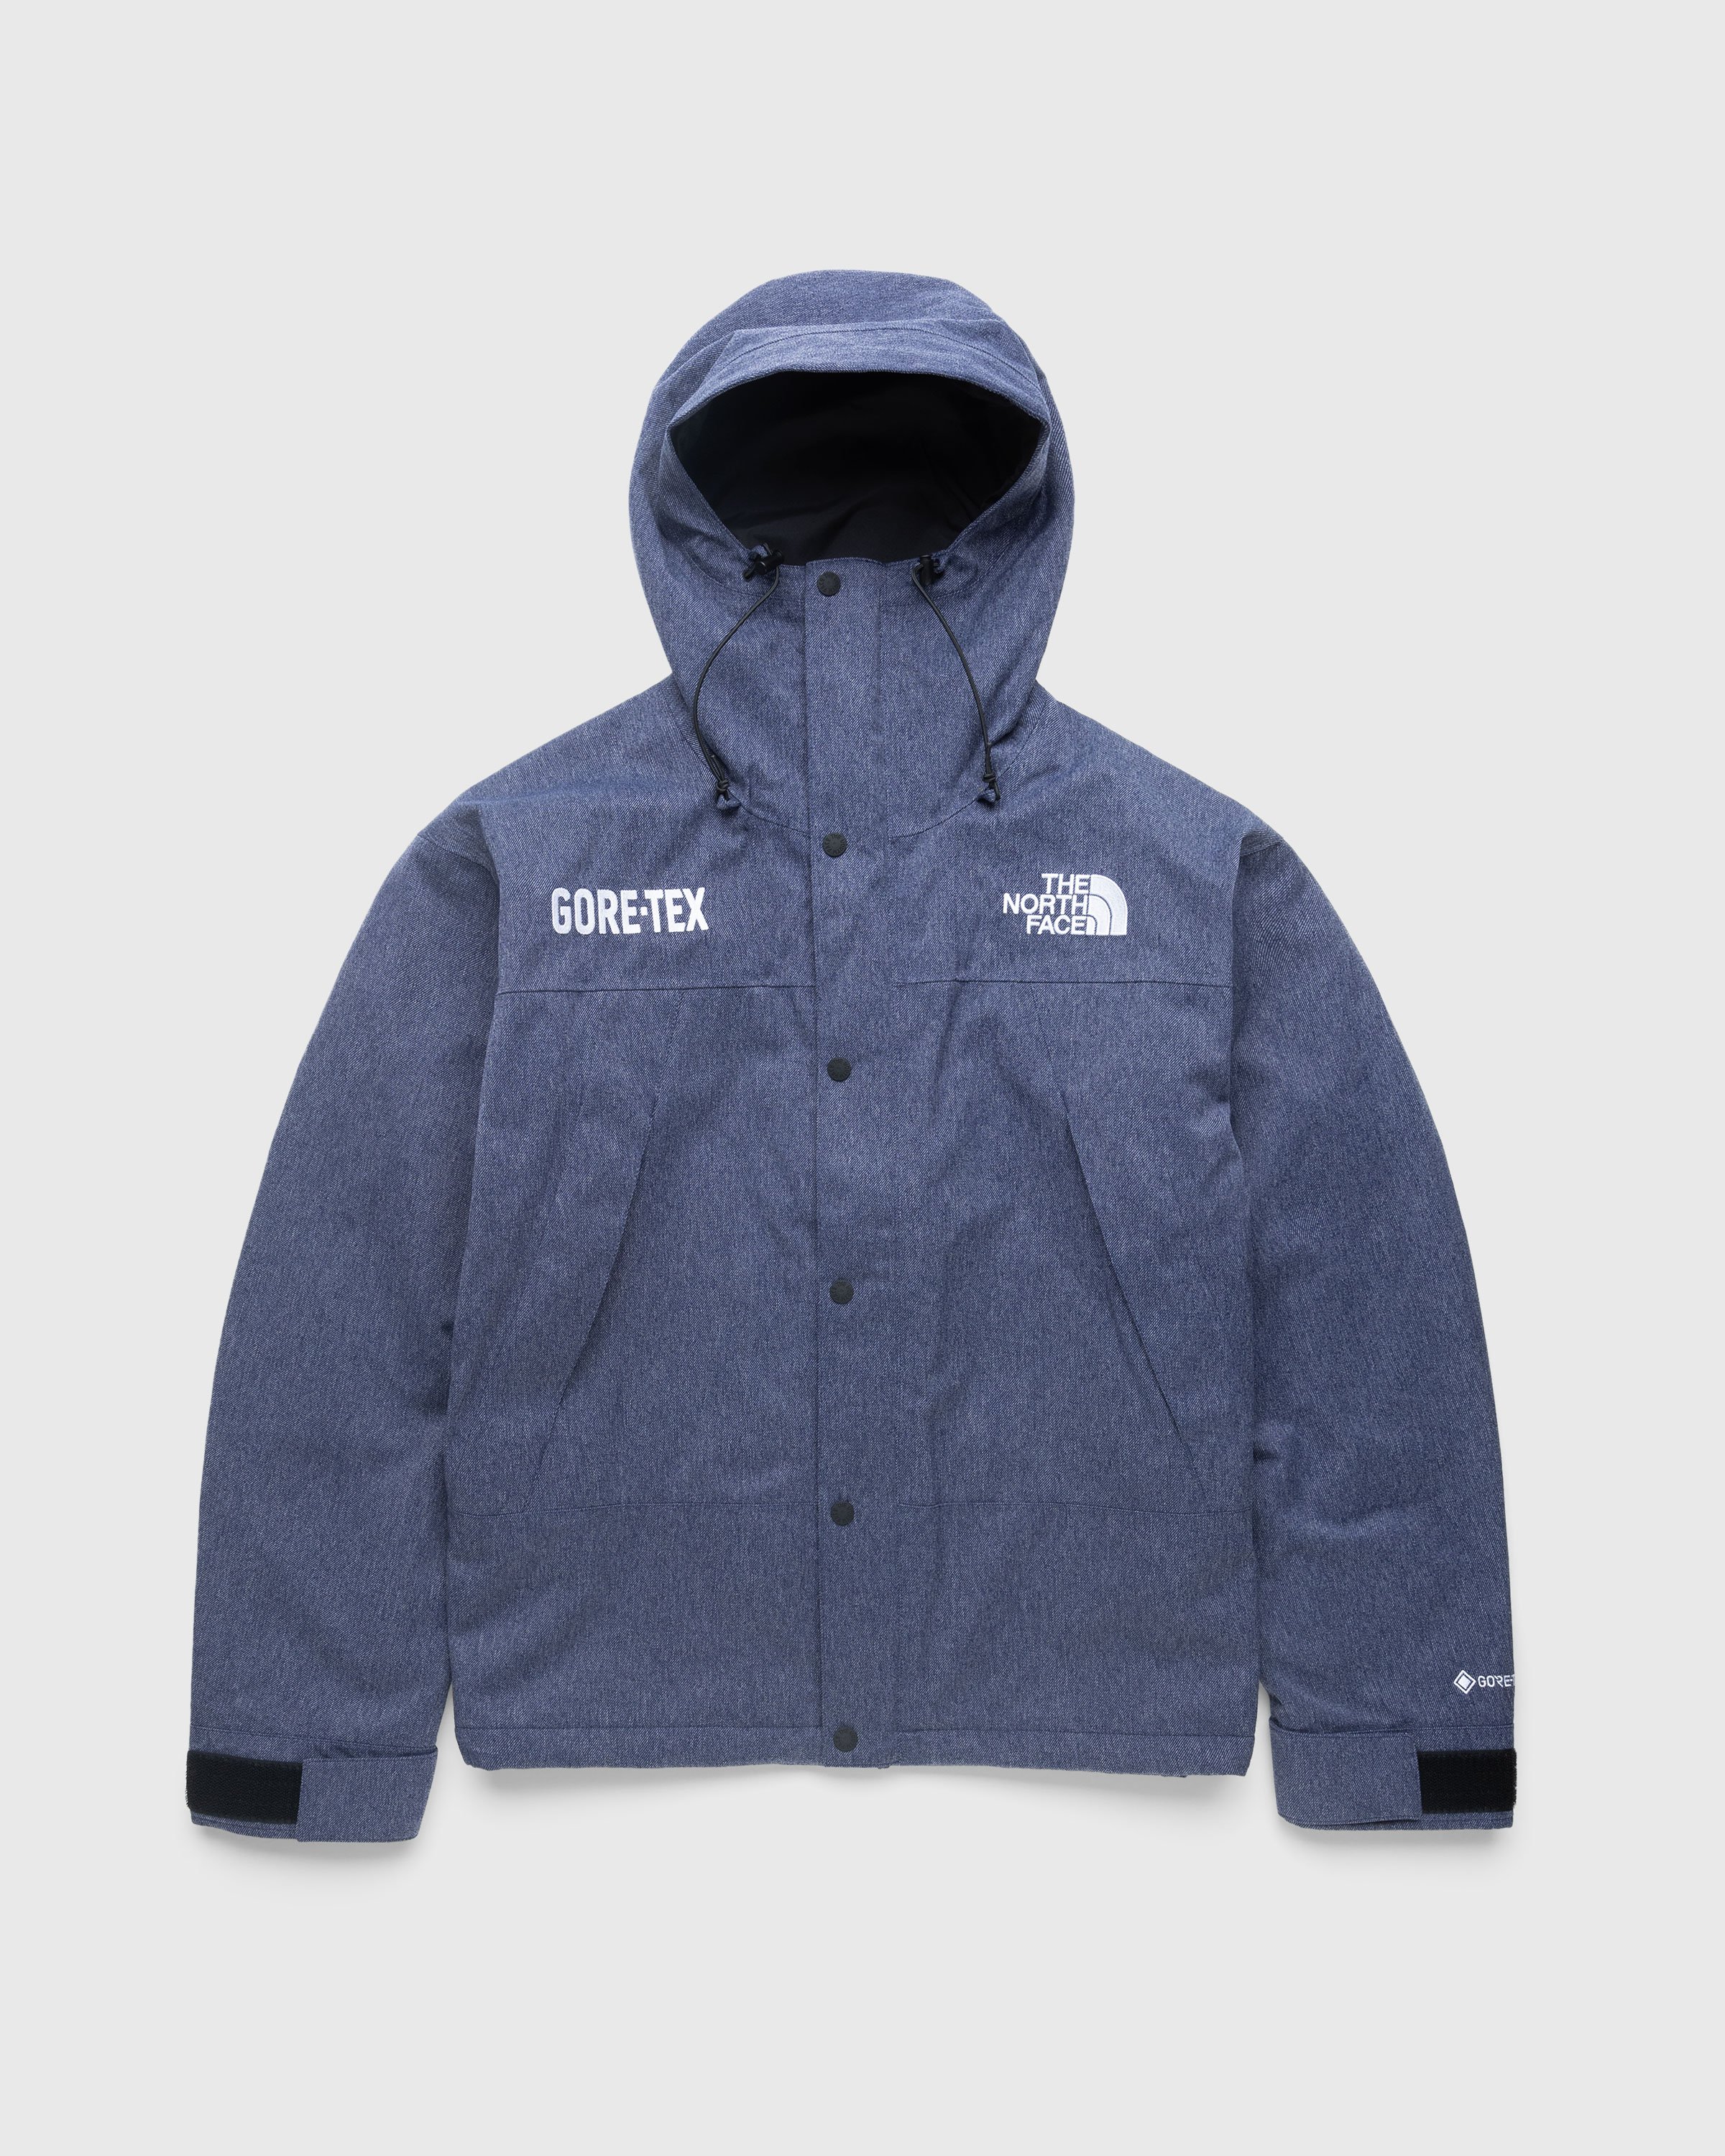 The North Face - GORE-TEX Mountain Jacket Denim Blue/TNF Black - Clothing - Blue - Image 1